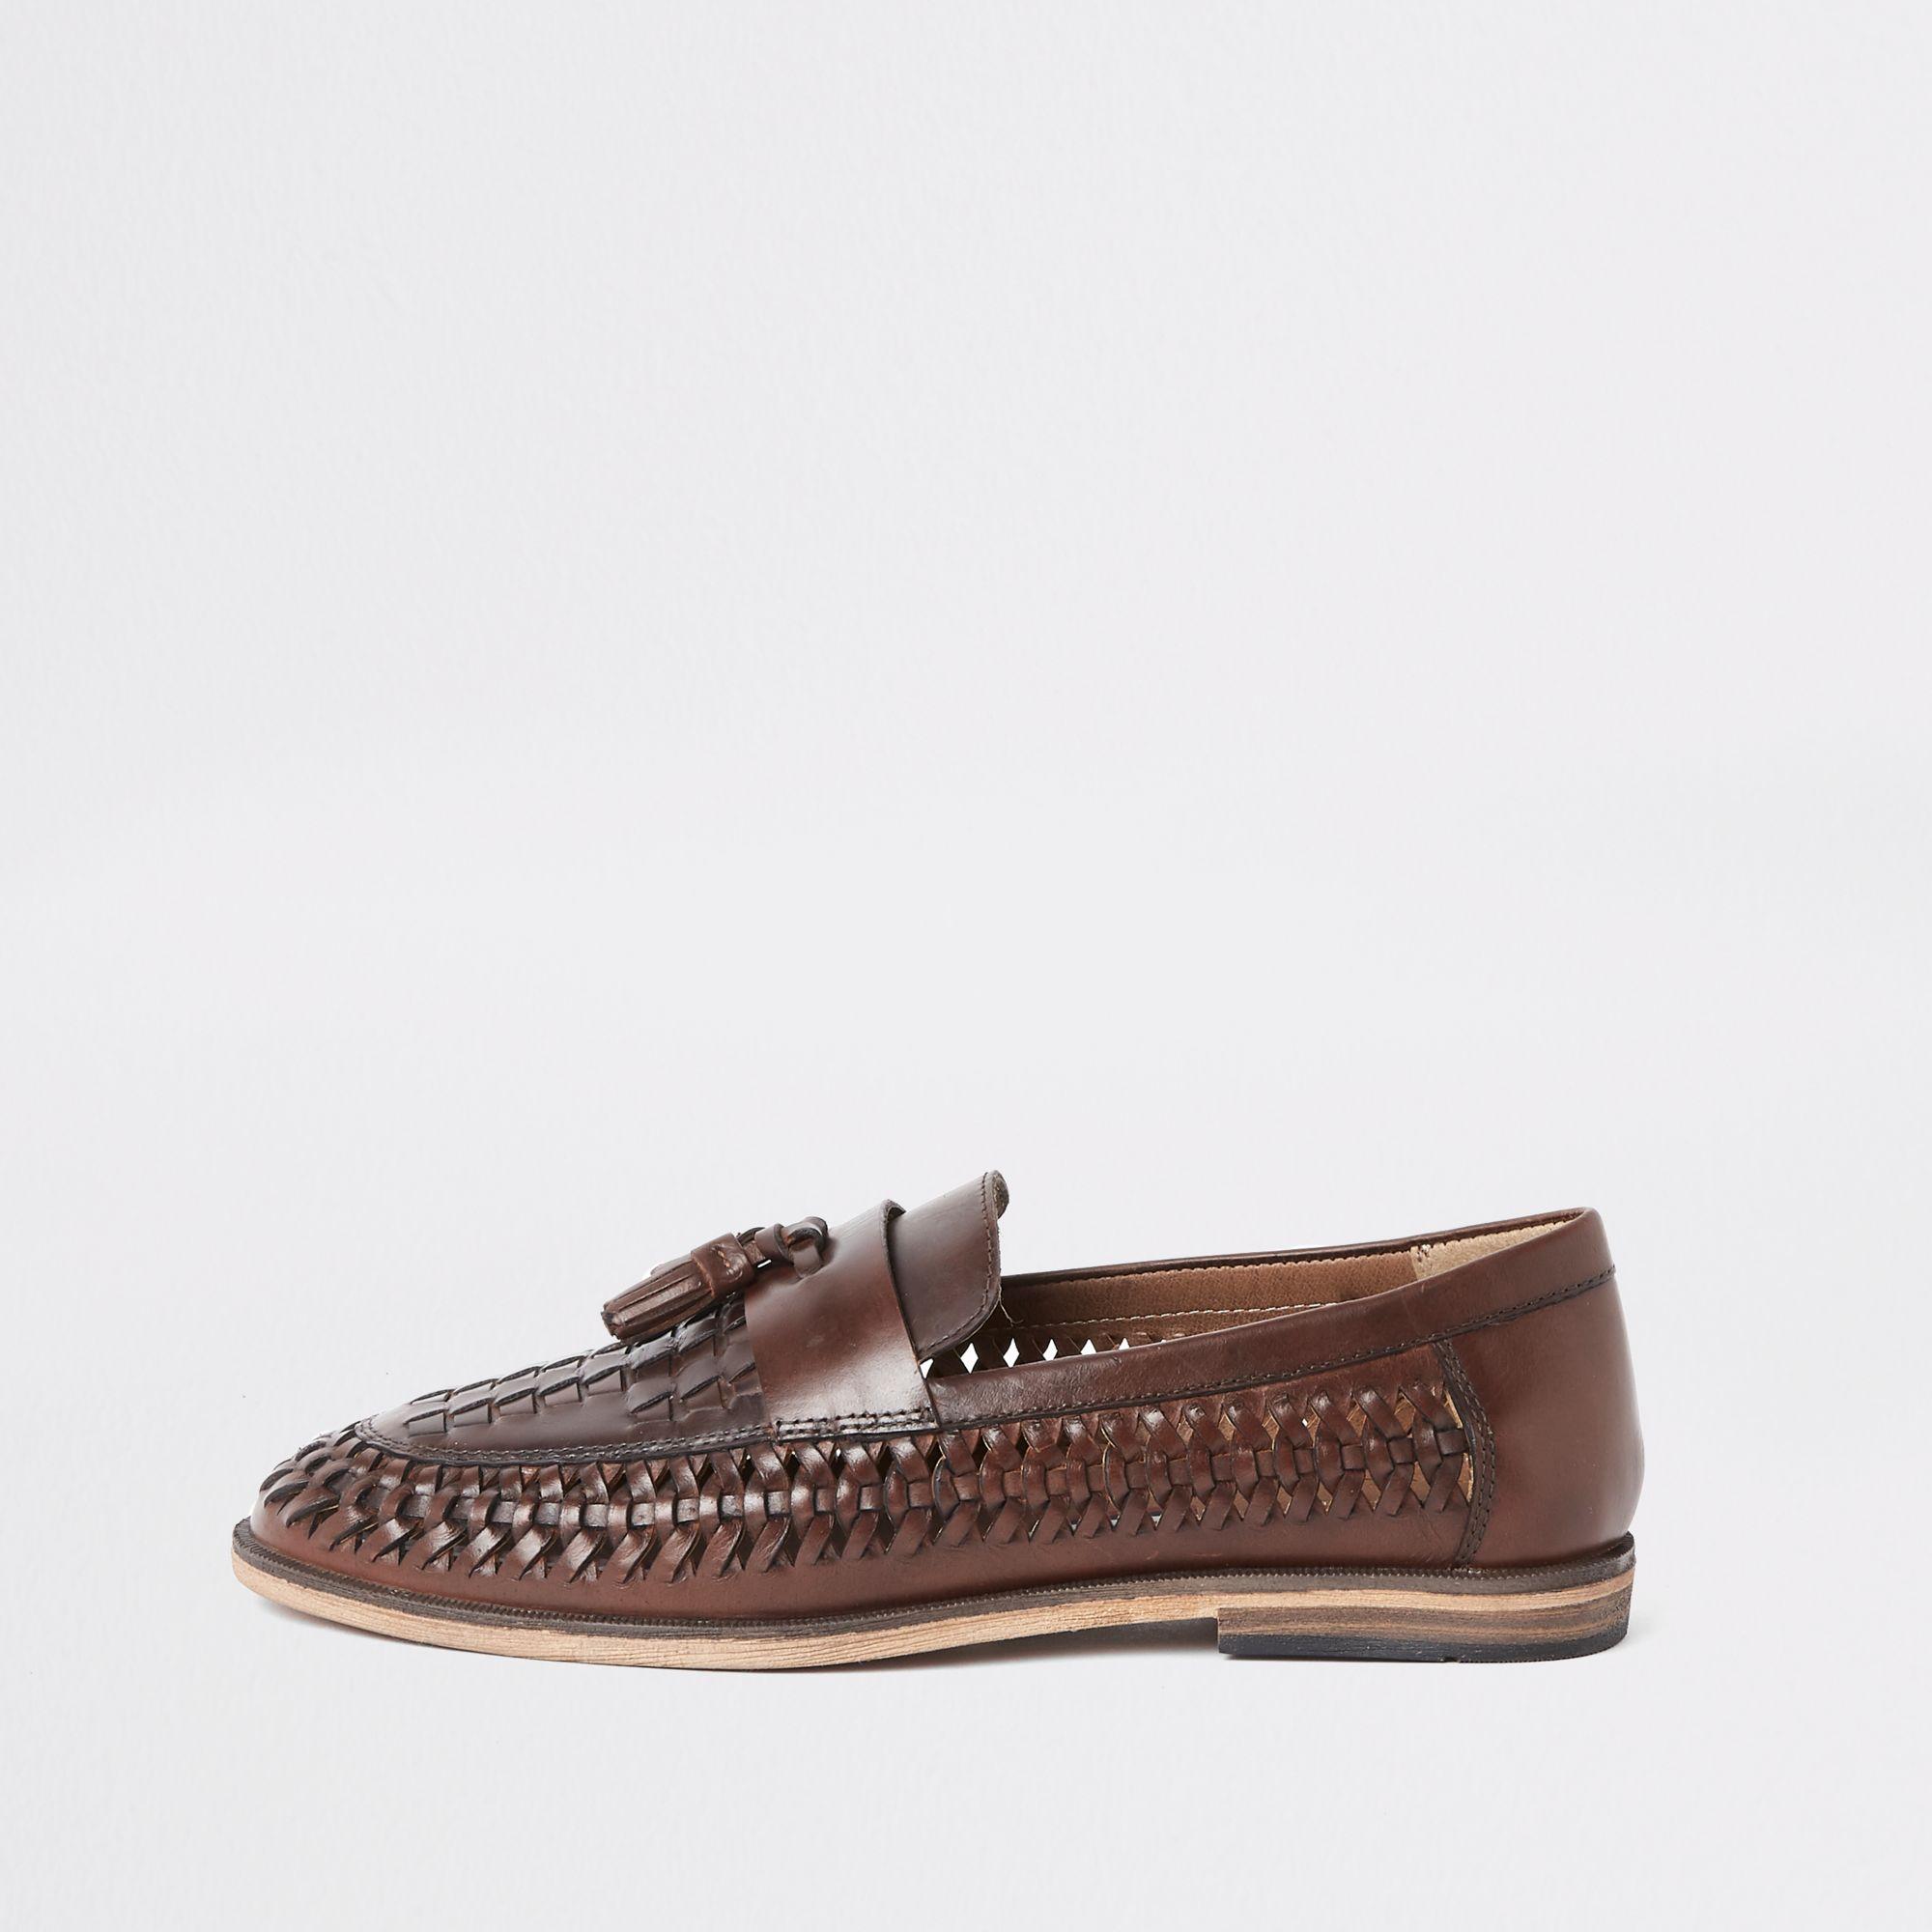 River Island Dark Brown Leather Woven Tassel Loafers for Men - Lyst